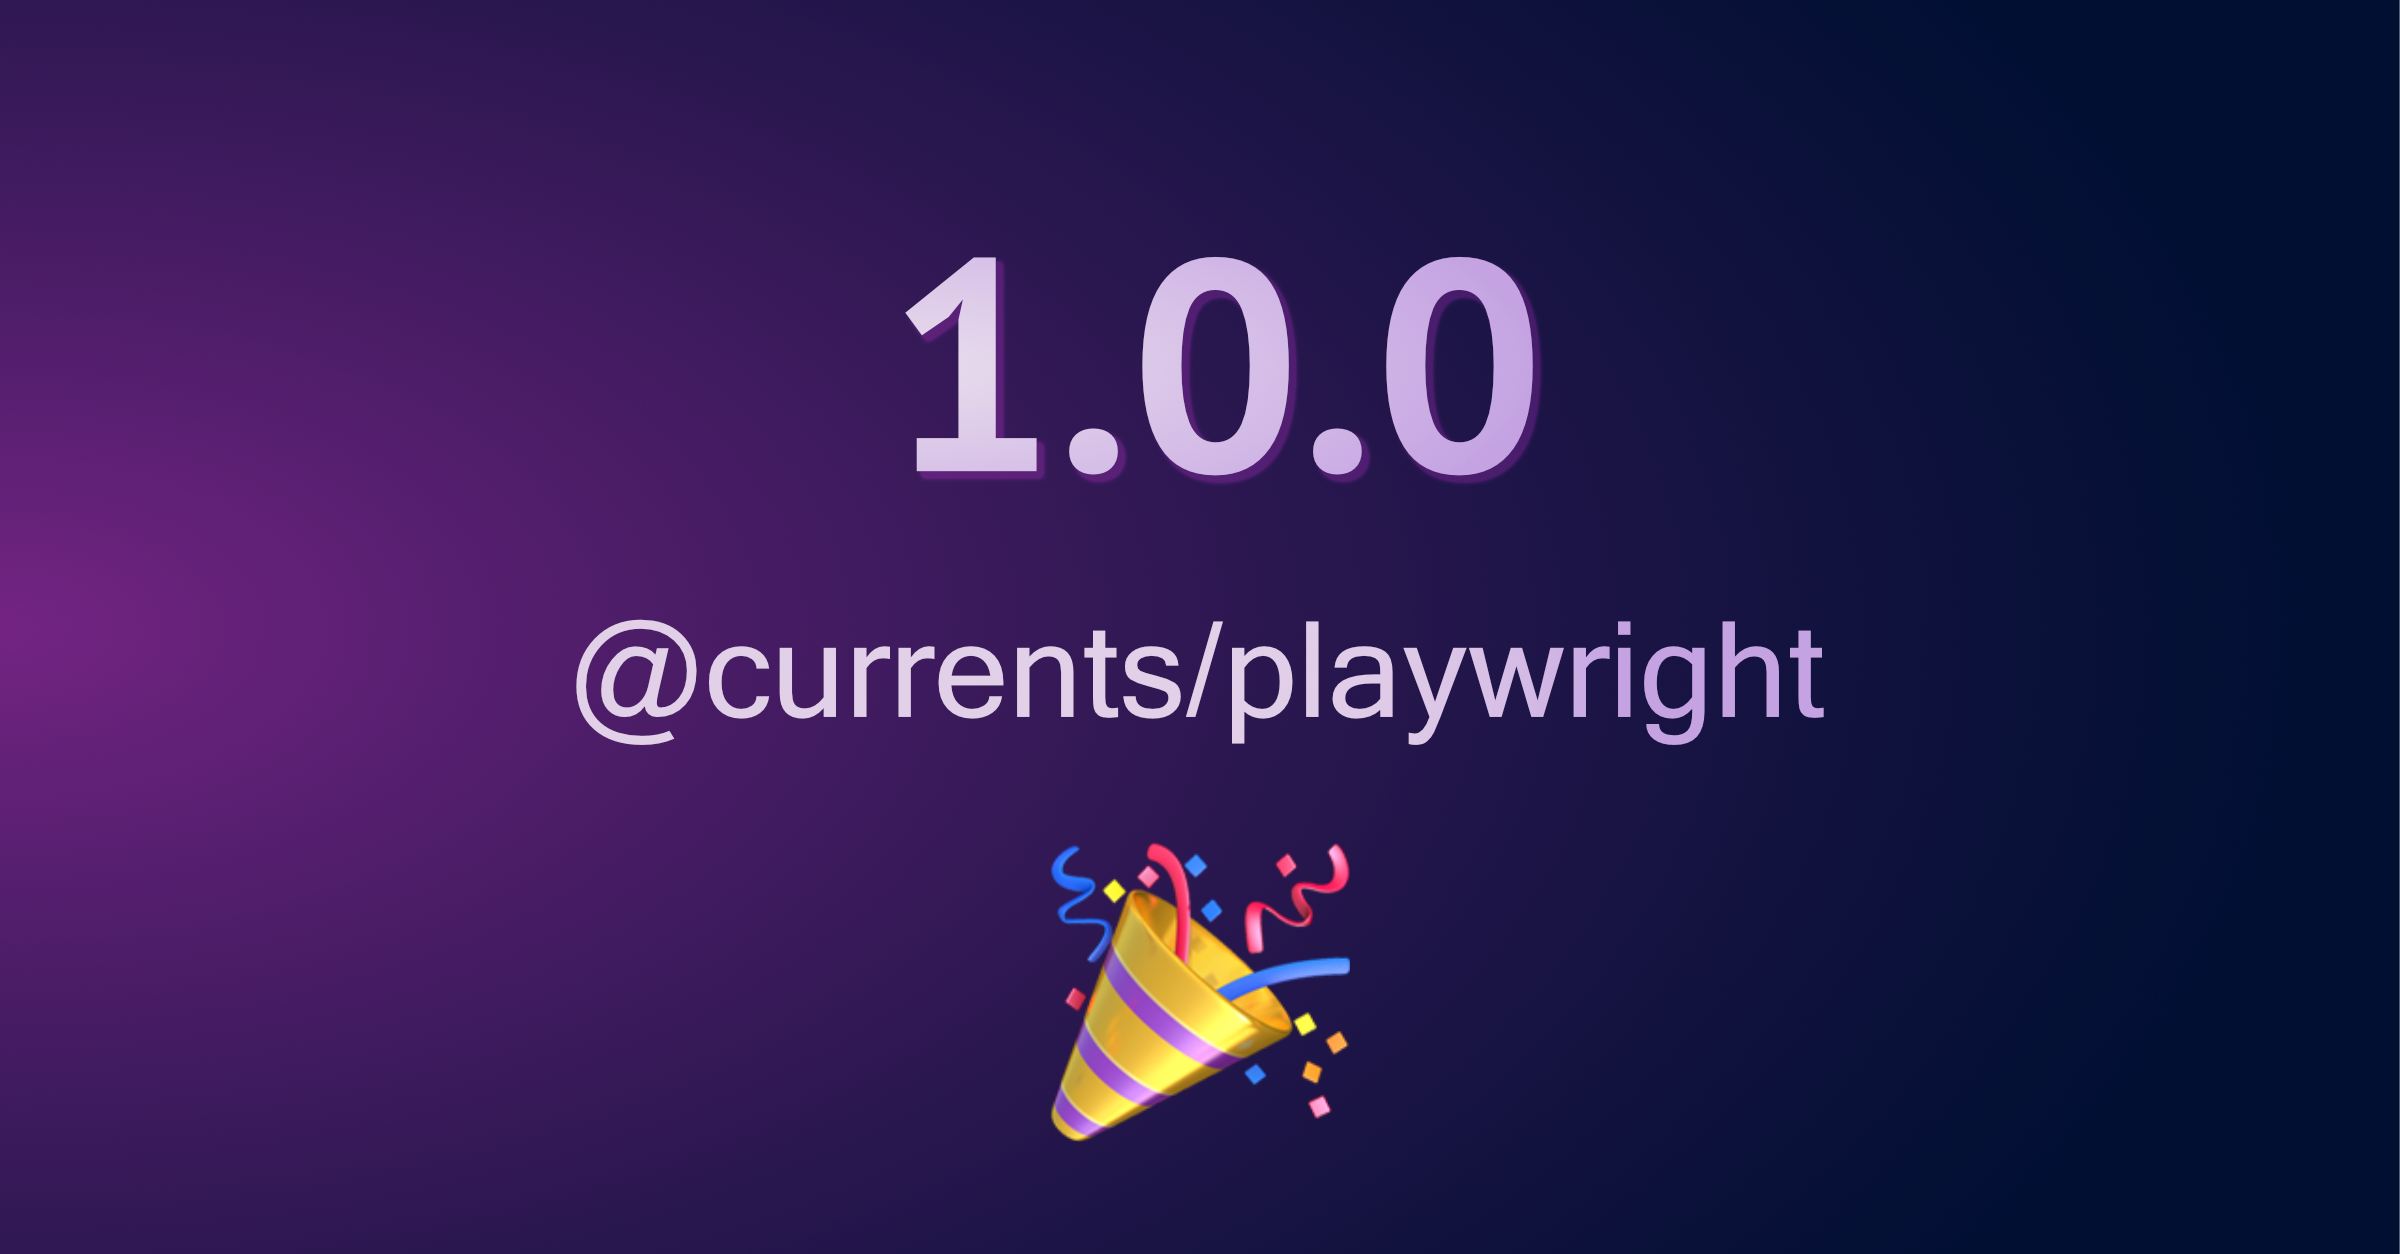 Playwright Reporter for Currents v1.0.0 ✨